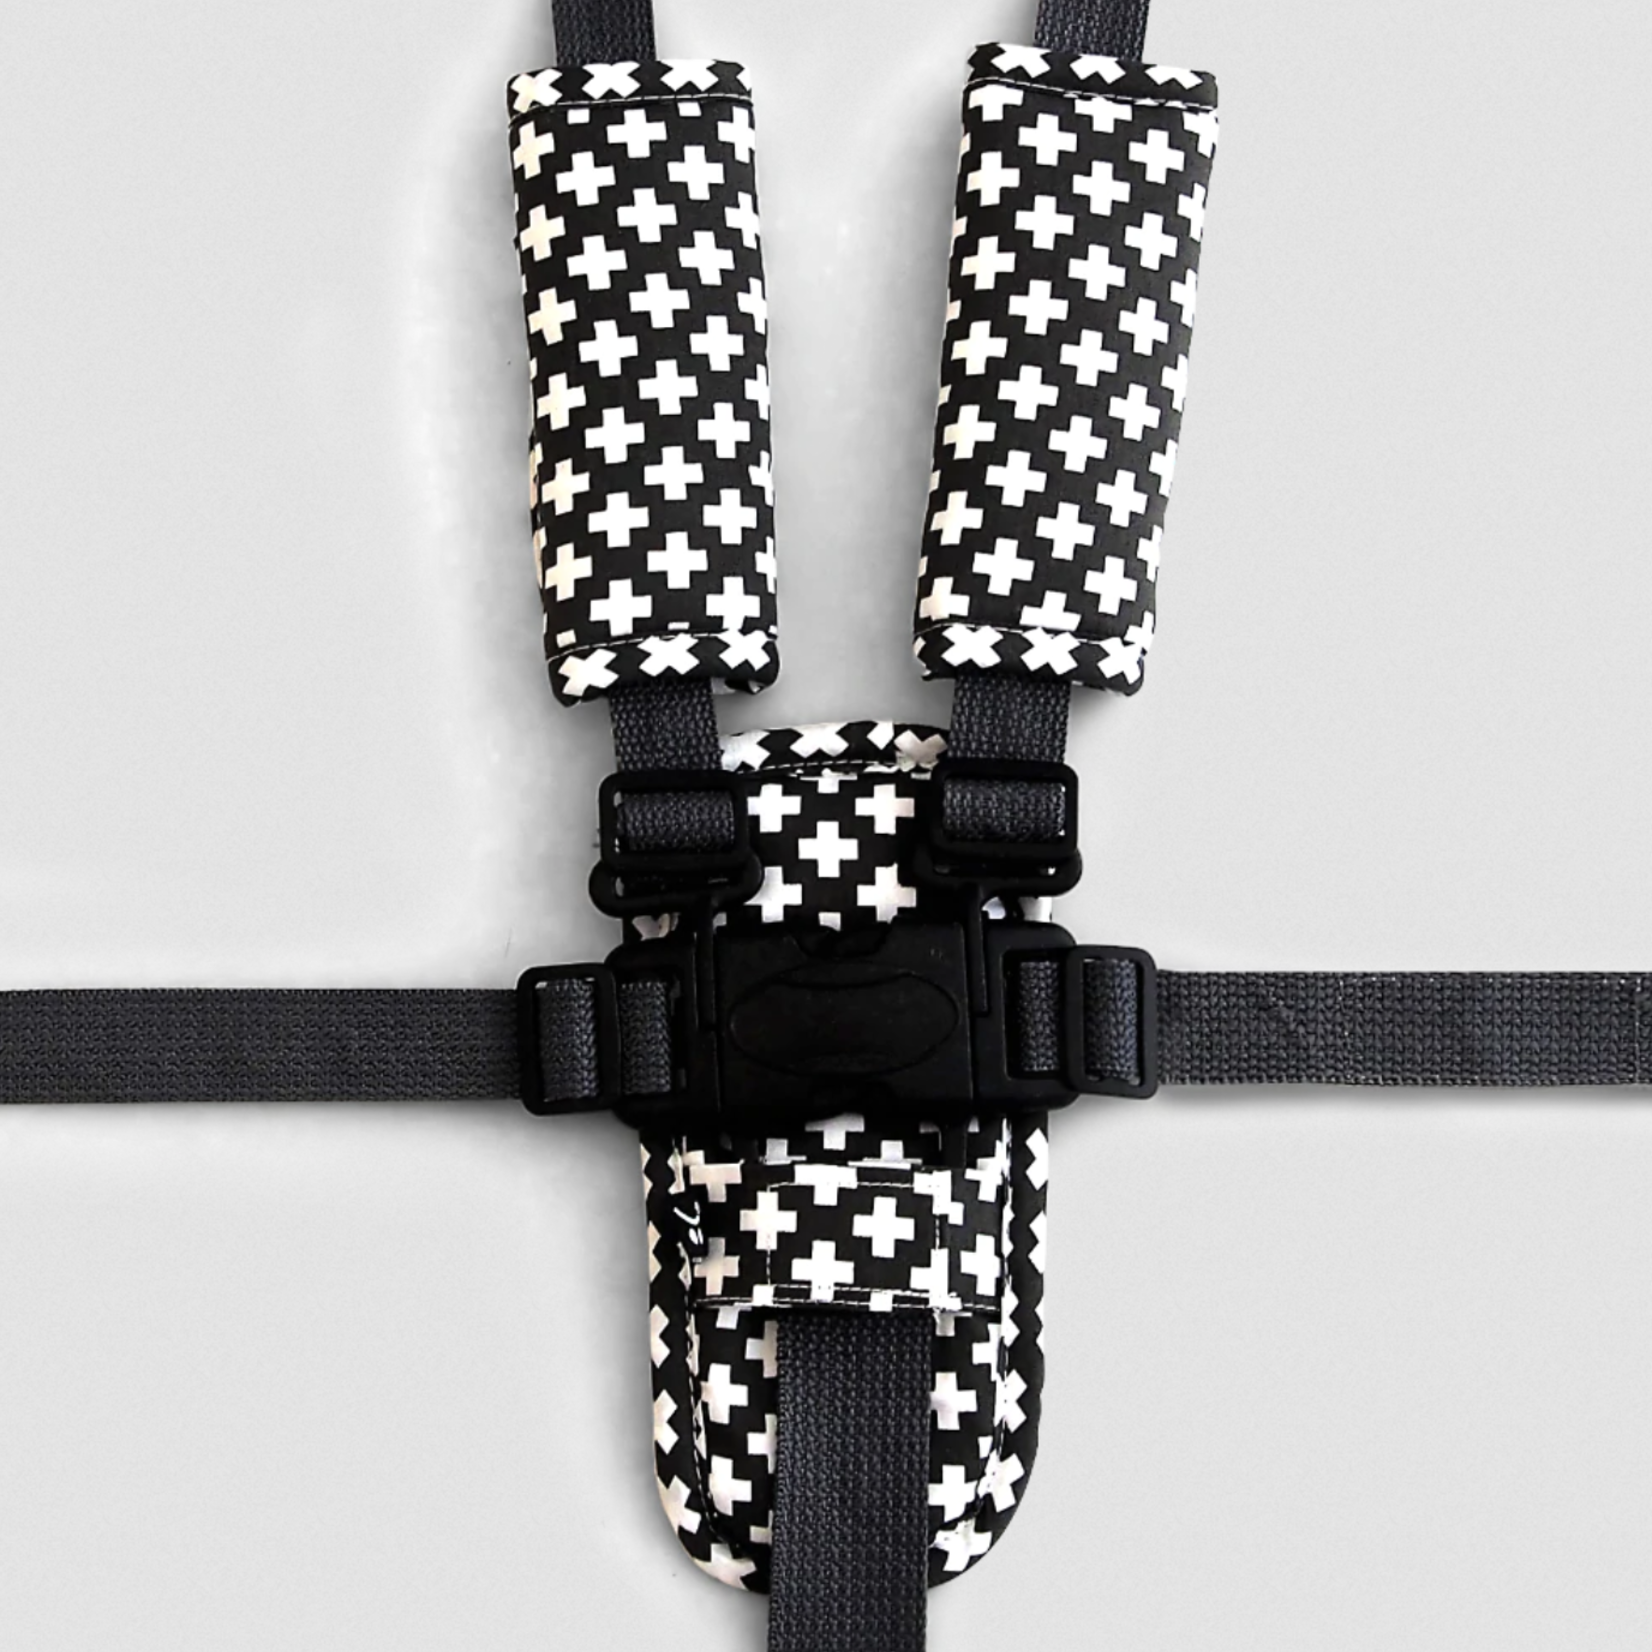 Outlookbaby 3 Piece Harness Cover Set - Charcoal Crosses